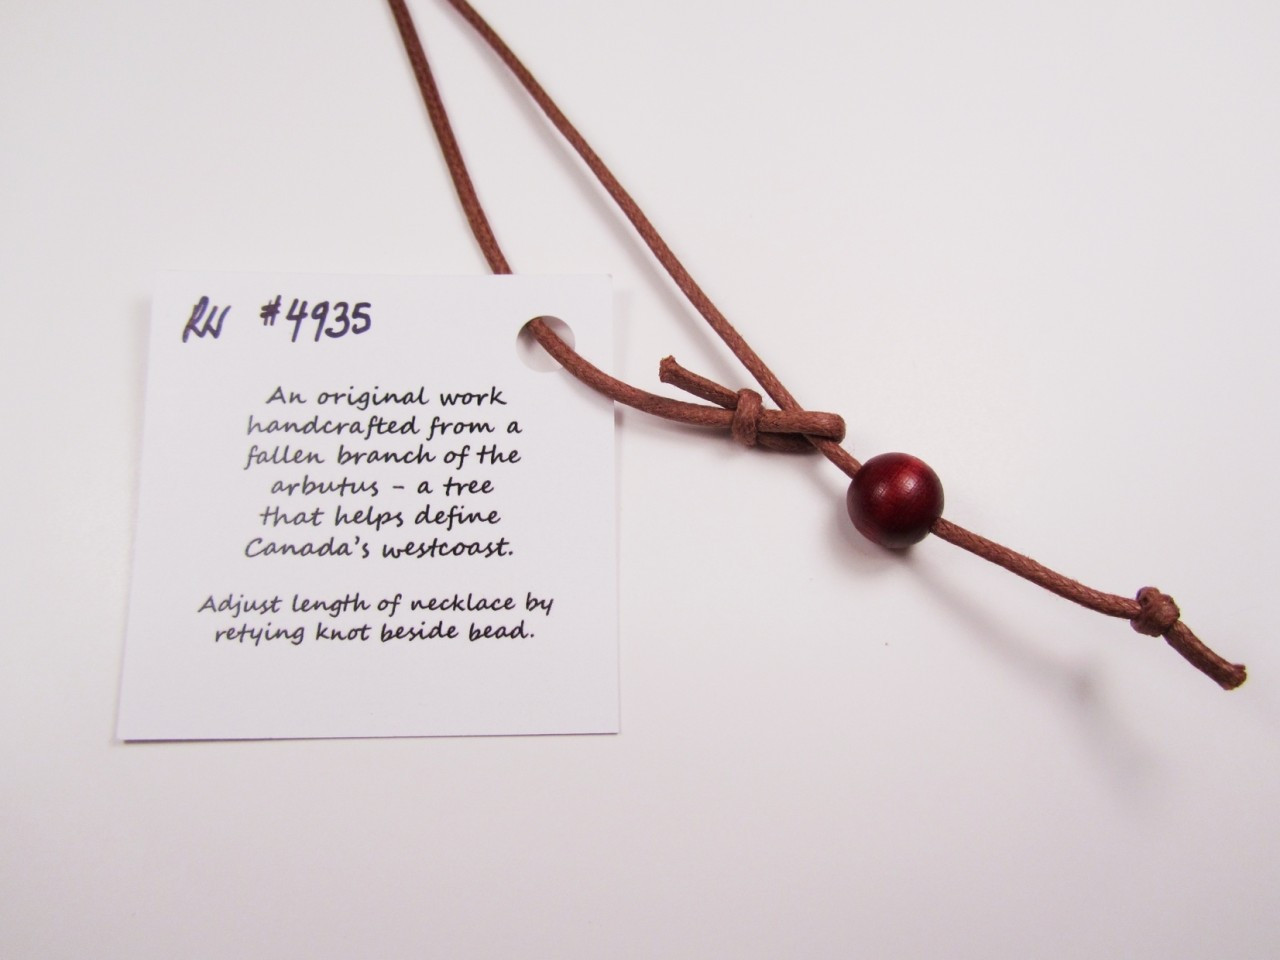 Necklace wood bead. Try also replacing with your own silver chain. It will look beautiful!